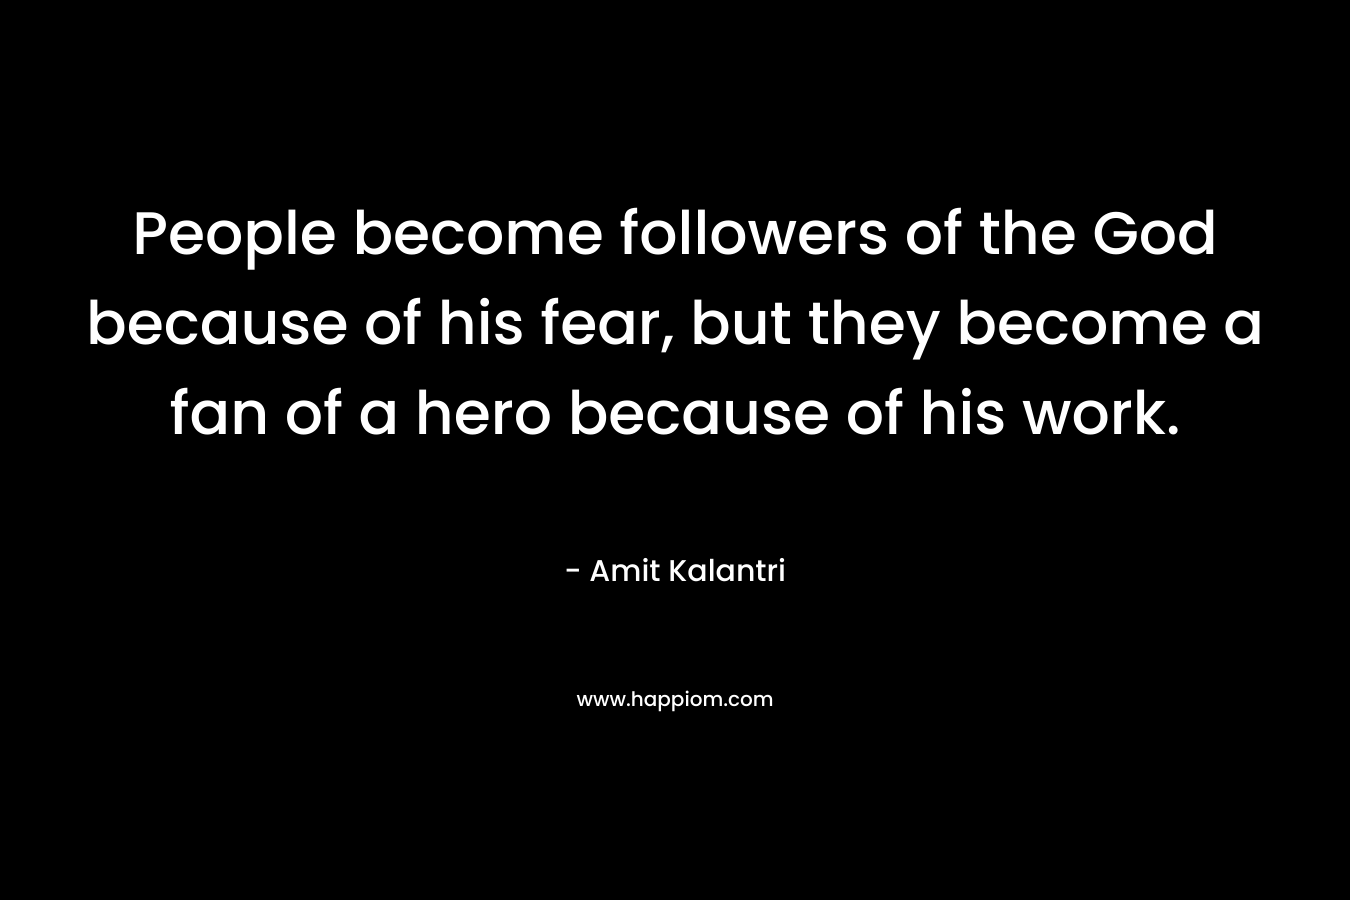 People become followers of the God because of his fear, but they become a fan of a hero because of his work.